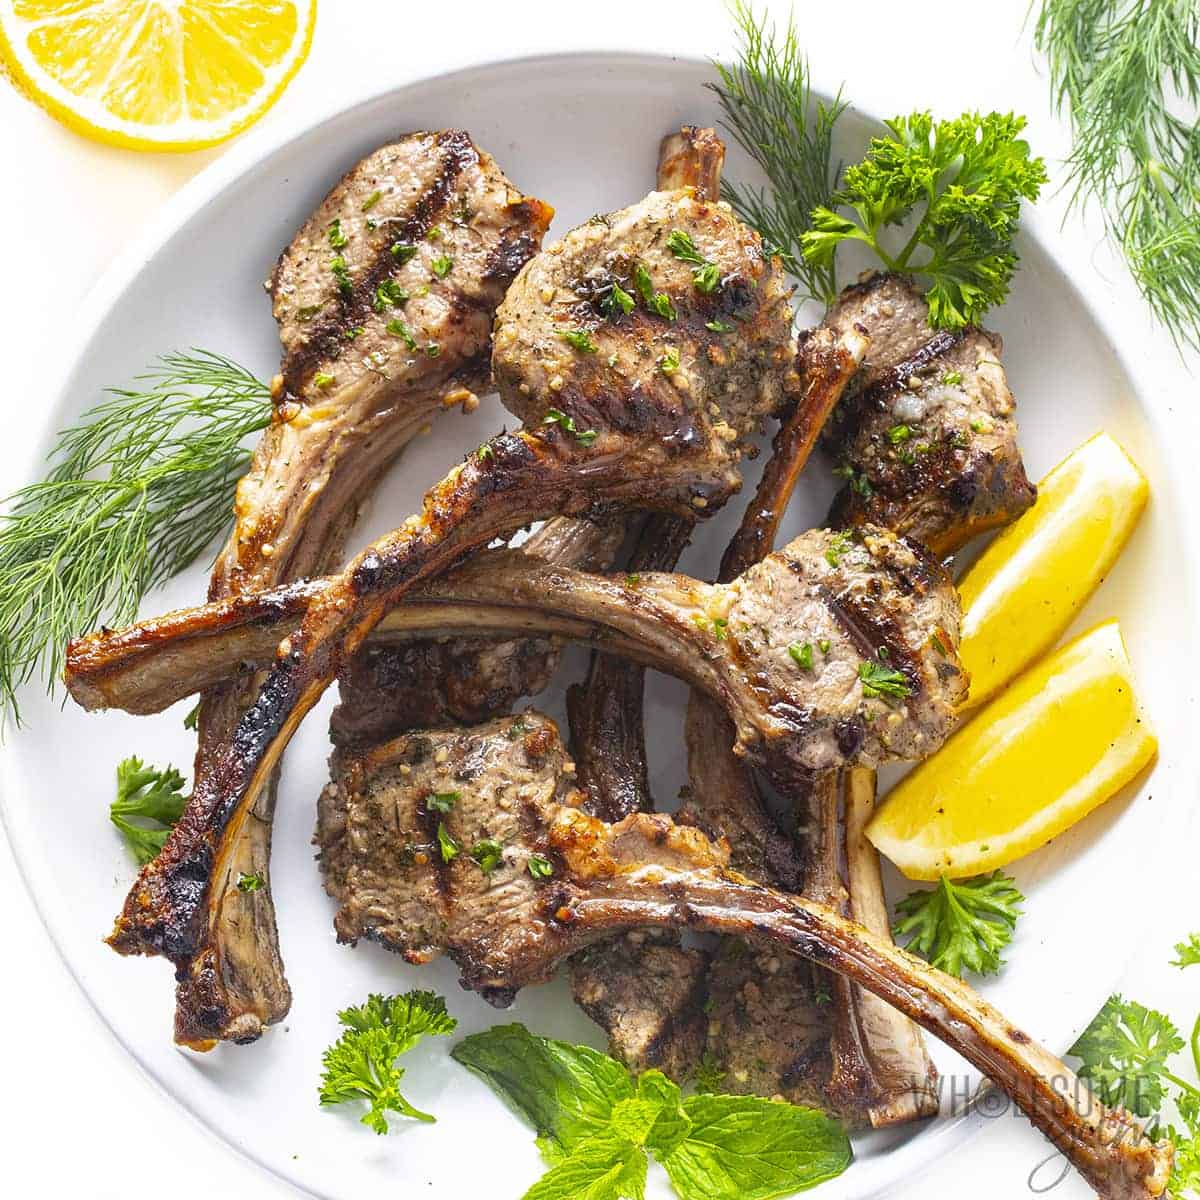 Grilled lamb chops with fresh herbs and lemon wedges on a platter.